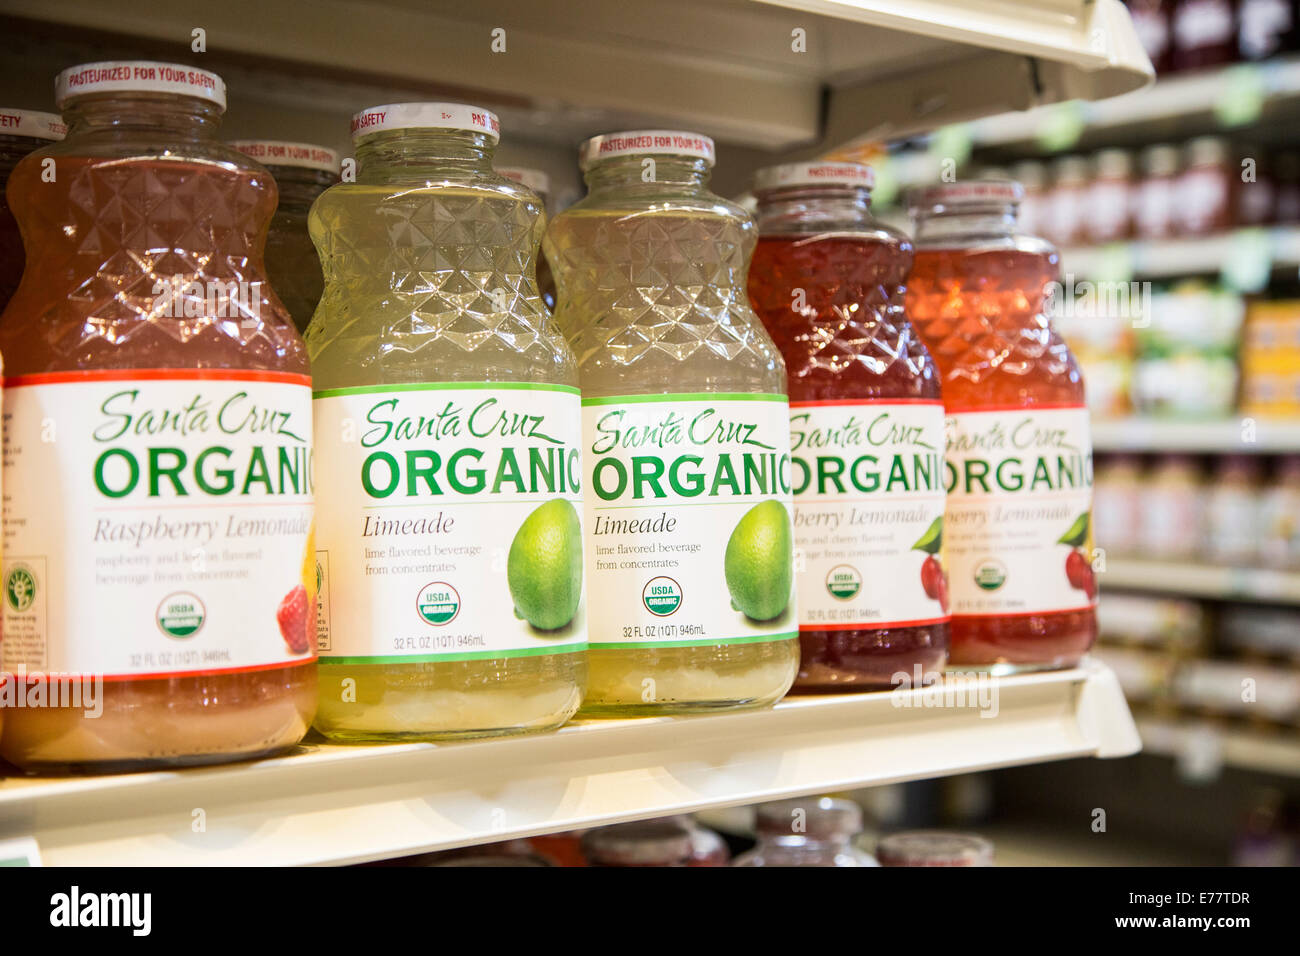 A natural foods grocery store aisle with a shelf of organic lemonade and limeade. Stock Photo